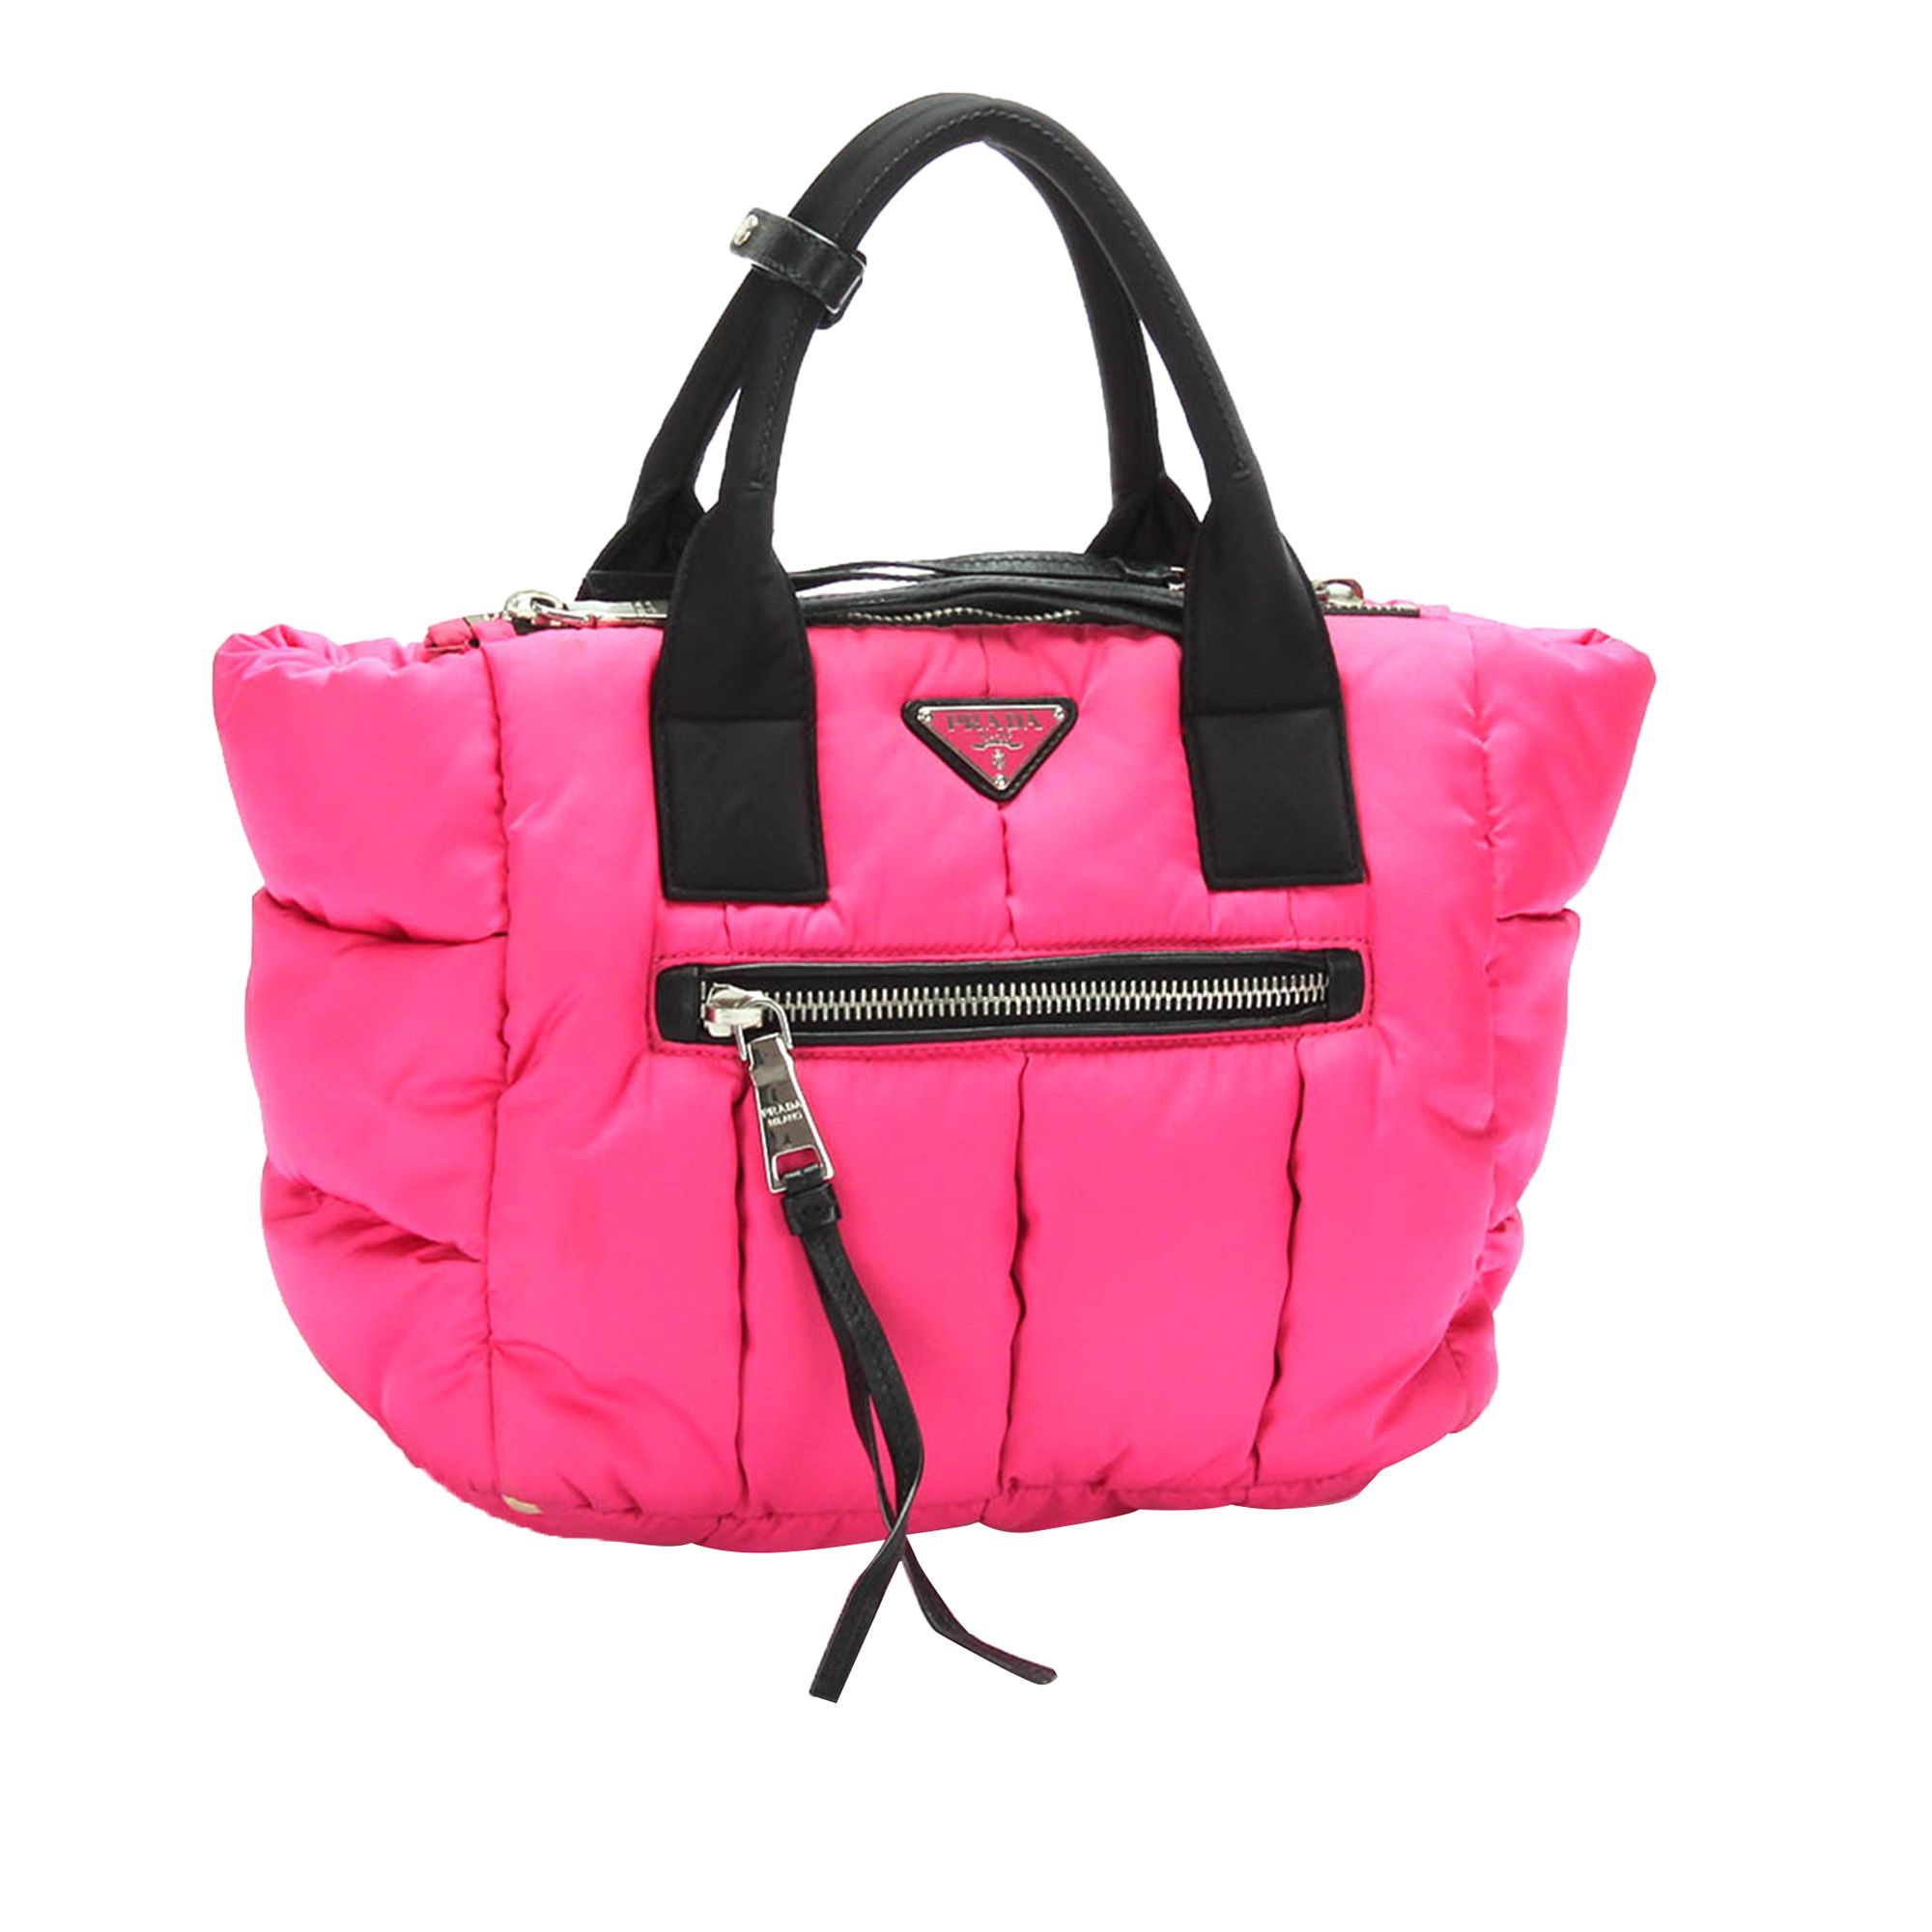 VINTAGE. RRP AS NEW. This satchel features a nylon body, an exterior front pocket, rolled handles, a detachable strap, and a top zip closure.
Dimensions:
Length 23cm
Width 30cm
Depth 20cm
Hand Drop 10cm
Shoulder Drop 65cm

Original Accessories: This item has no other original accessories.

Color: Pink x Black
Material: Fabric x Nylon
Country of Origin: Italy
Boutique Reference: SSU105564K1342


Product Rating: GoodCondition